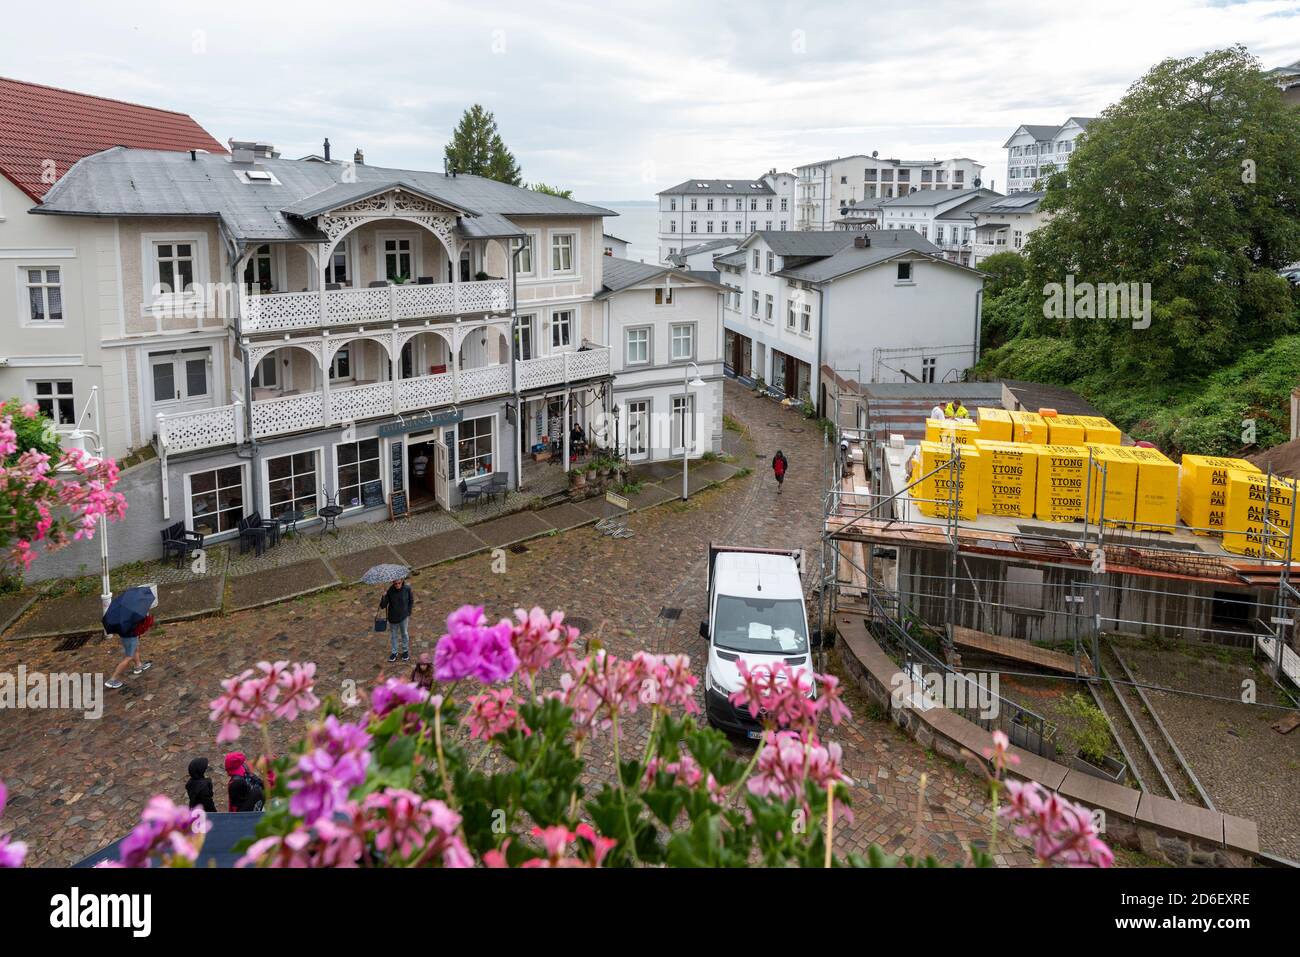 Germany, Mecklenburg-Western Pomerania, Sassnitz, yellow aerated concrete blocks lie on the roof of a house, several hotels can be seen behind them Stock Photo